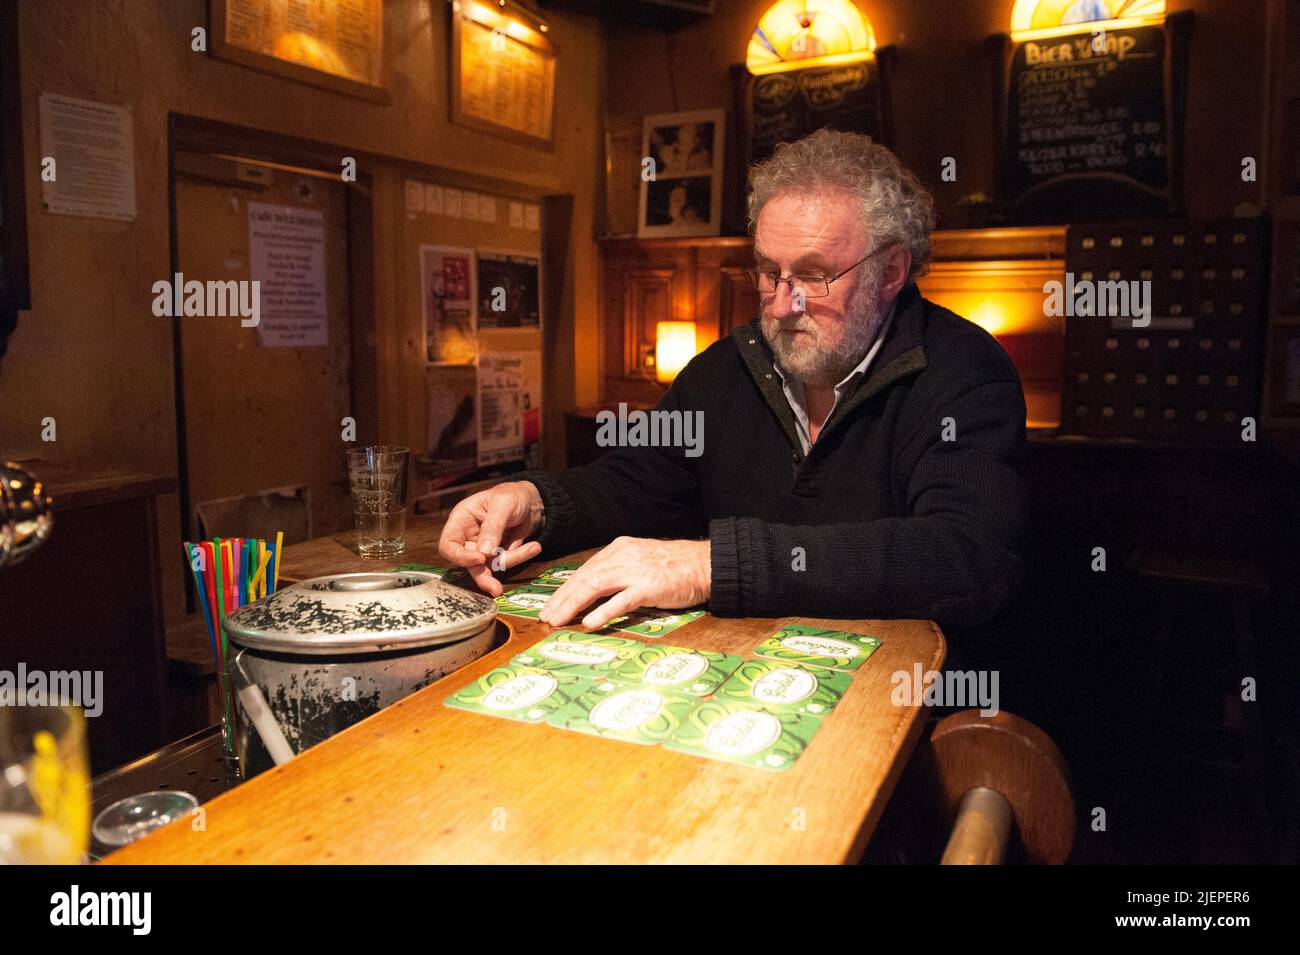 Tilburg, Netherlands. Senior adult male wearing beard and glasses hanging on Weemoed's Bar observing and being the former owner of the cafe establishment. Stock Photo